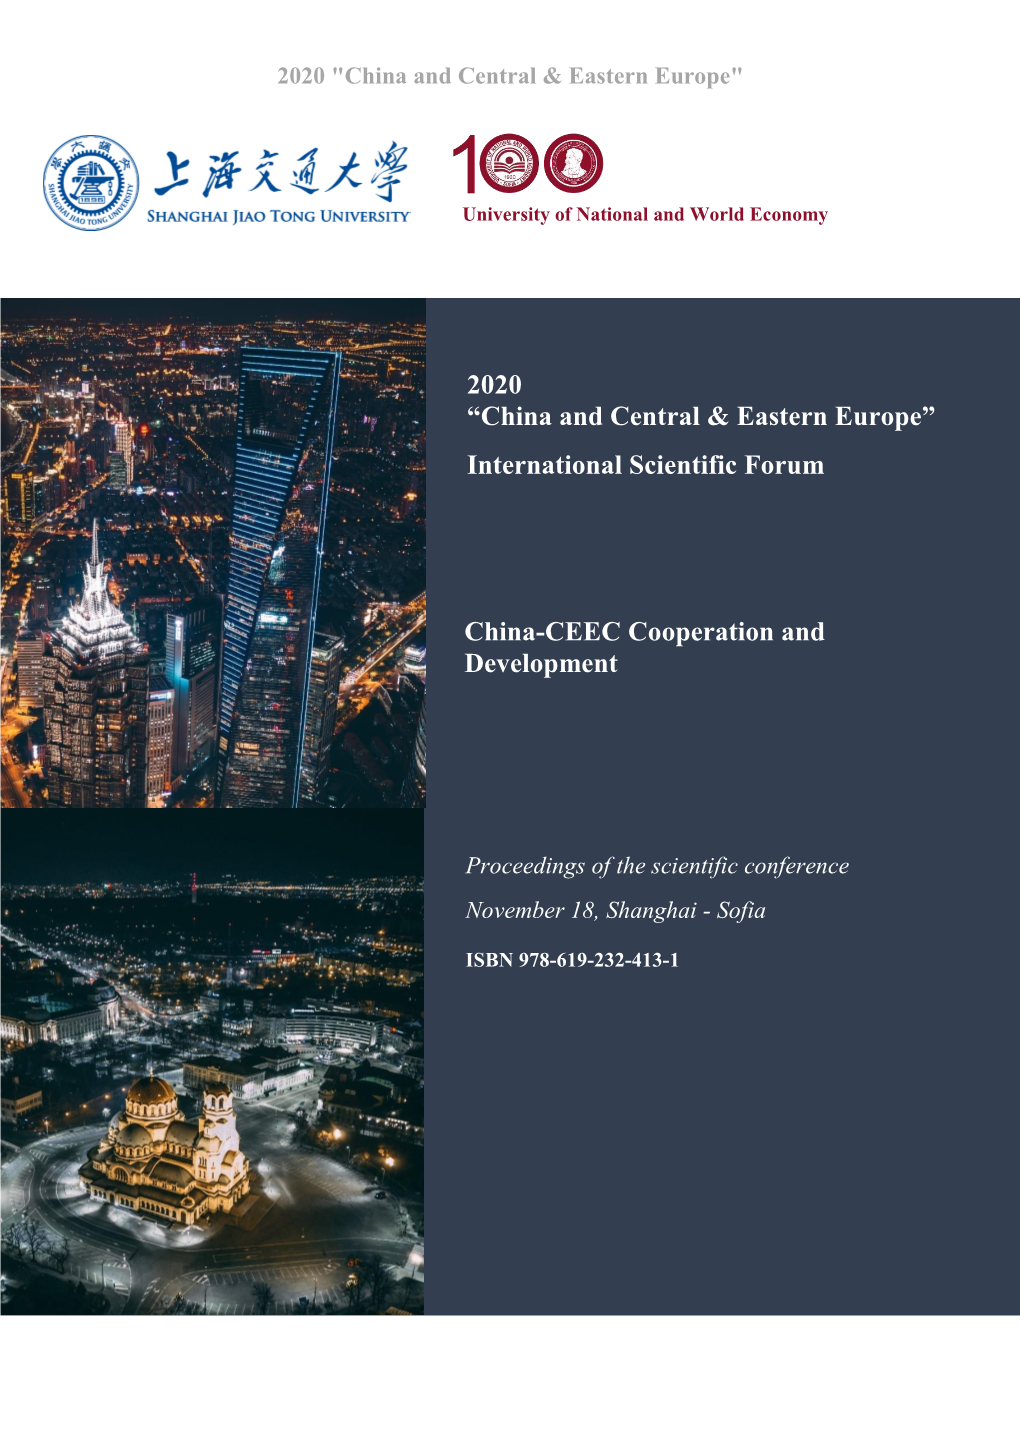 2020 “China and Central & Eastern Europe” International Scientific